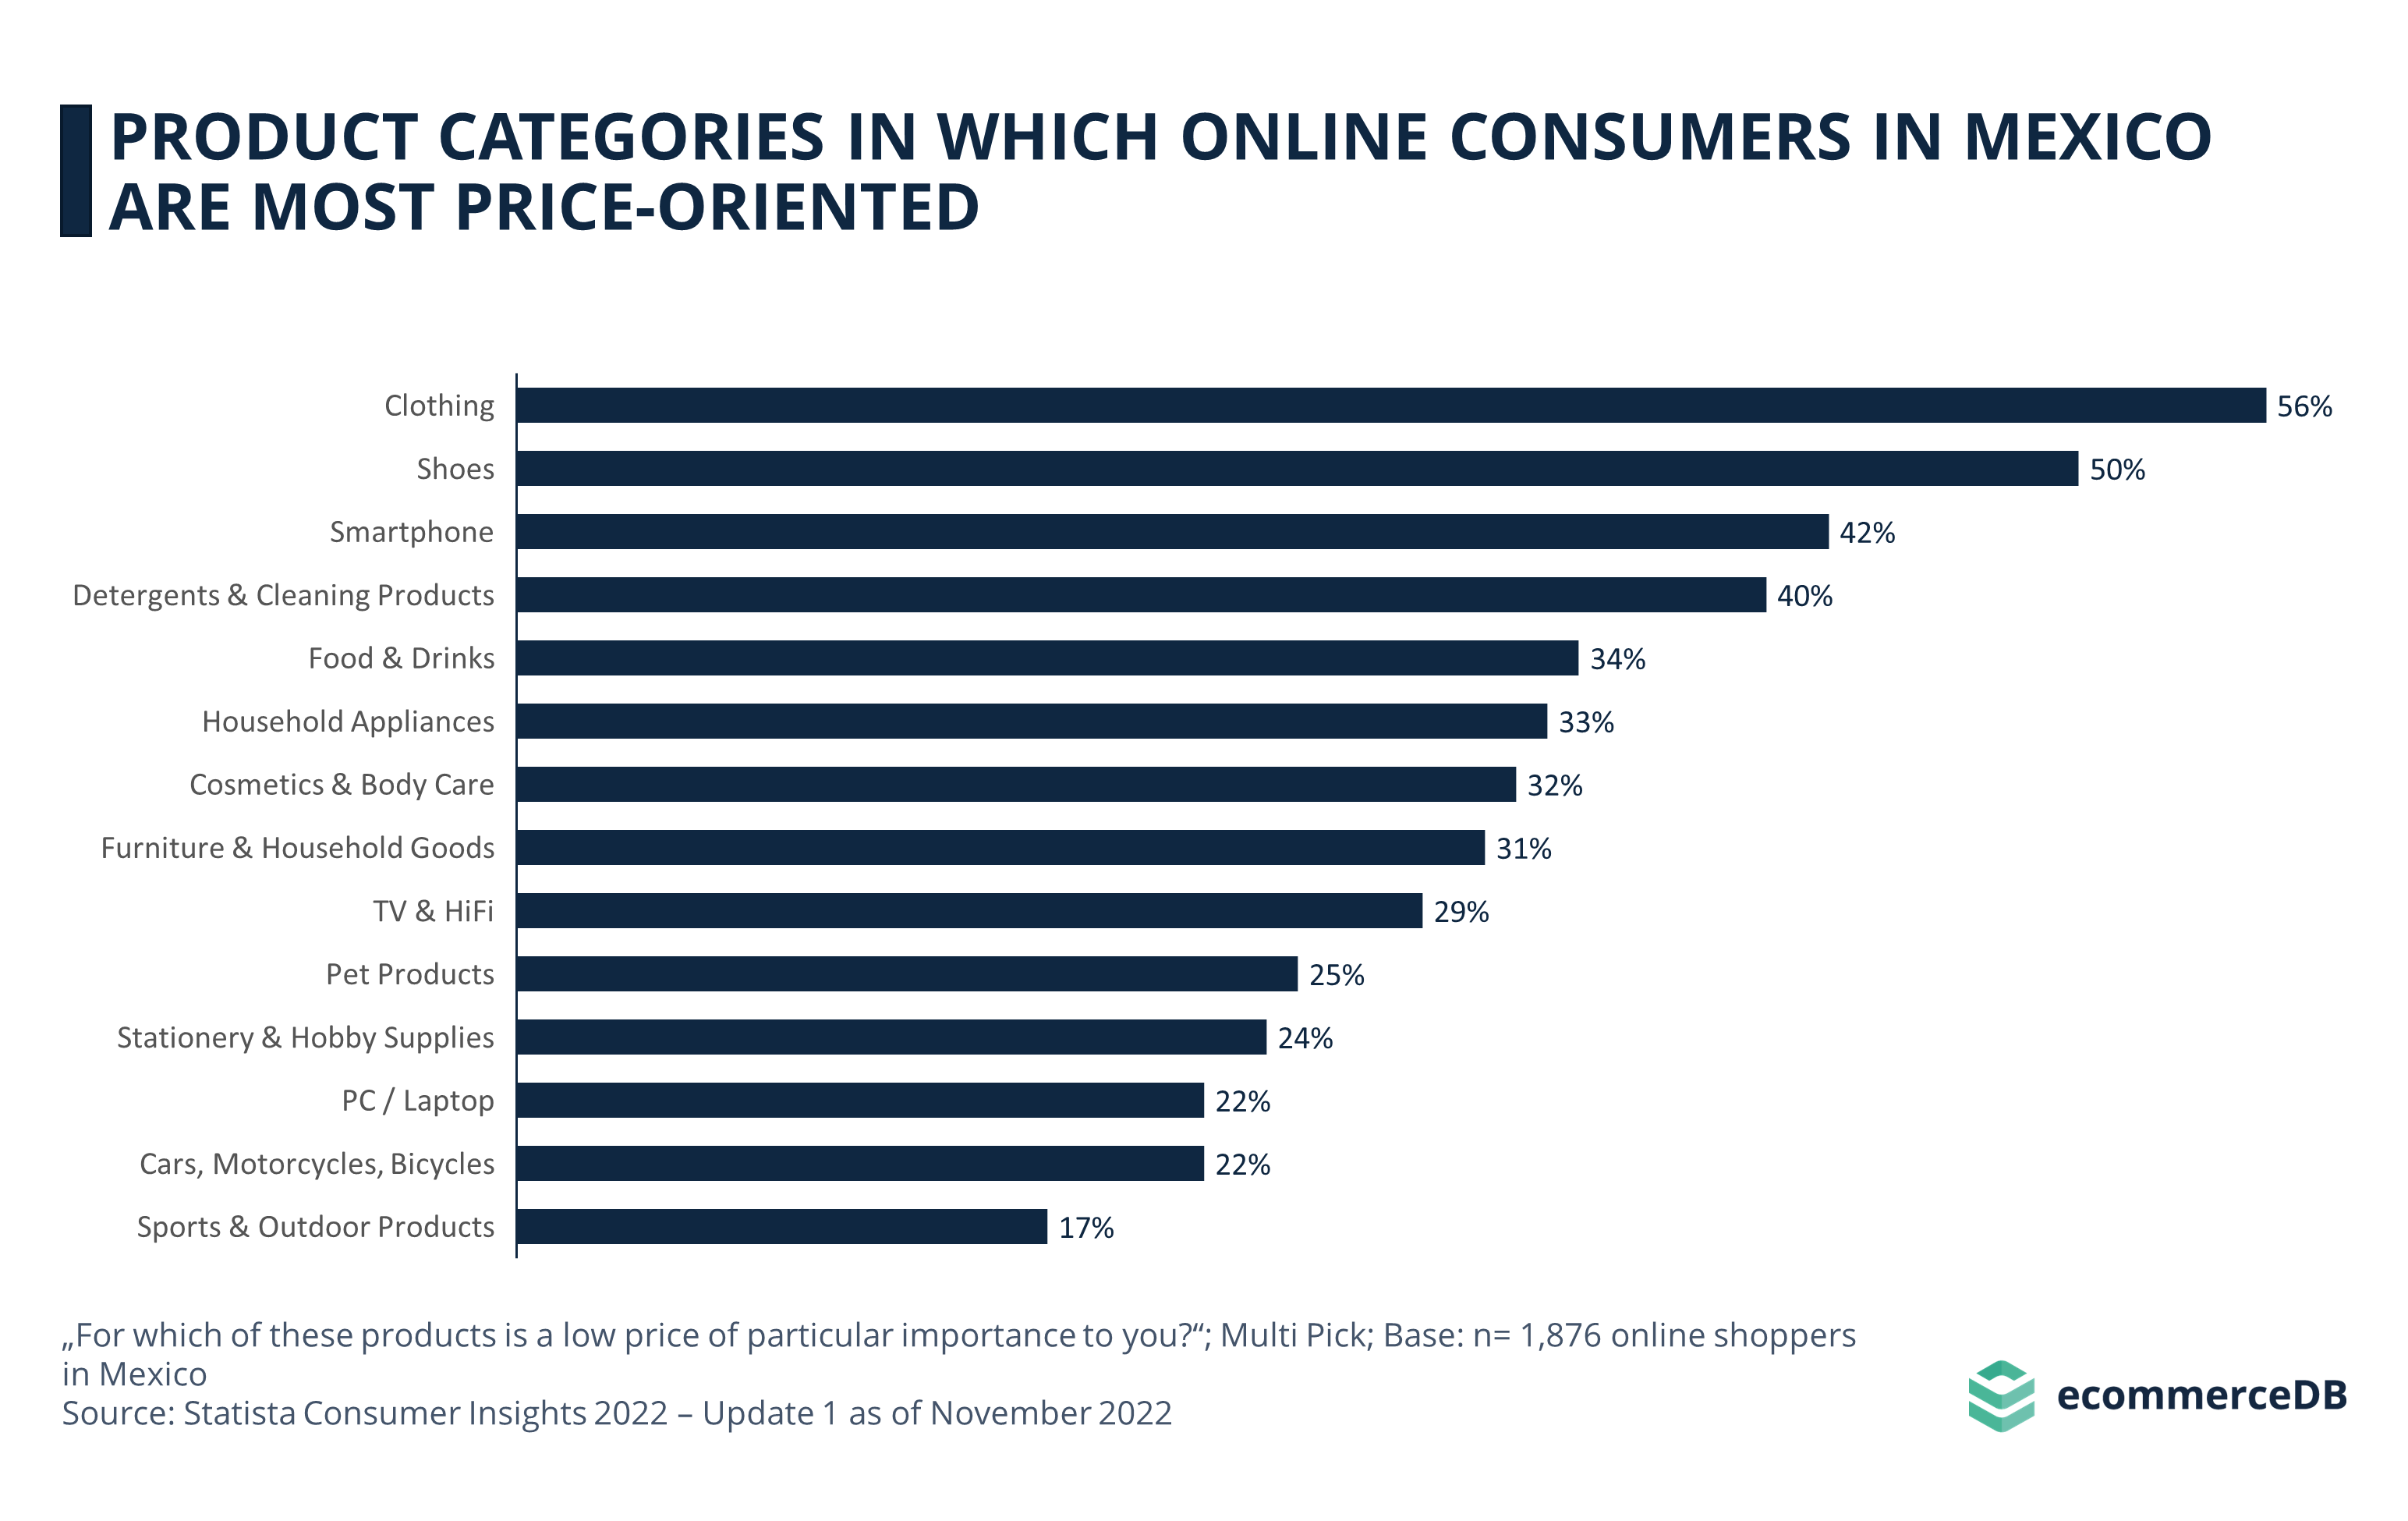 PRODUCT CATEGORIES IN WHICH ONLINE CONSUMERS IN MEXICO ARE MOST PRICE-ORIENTED